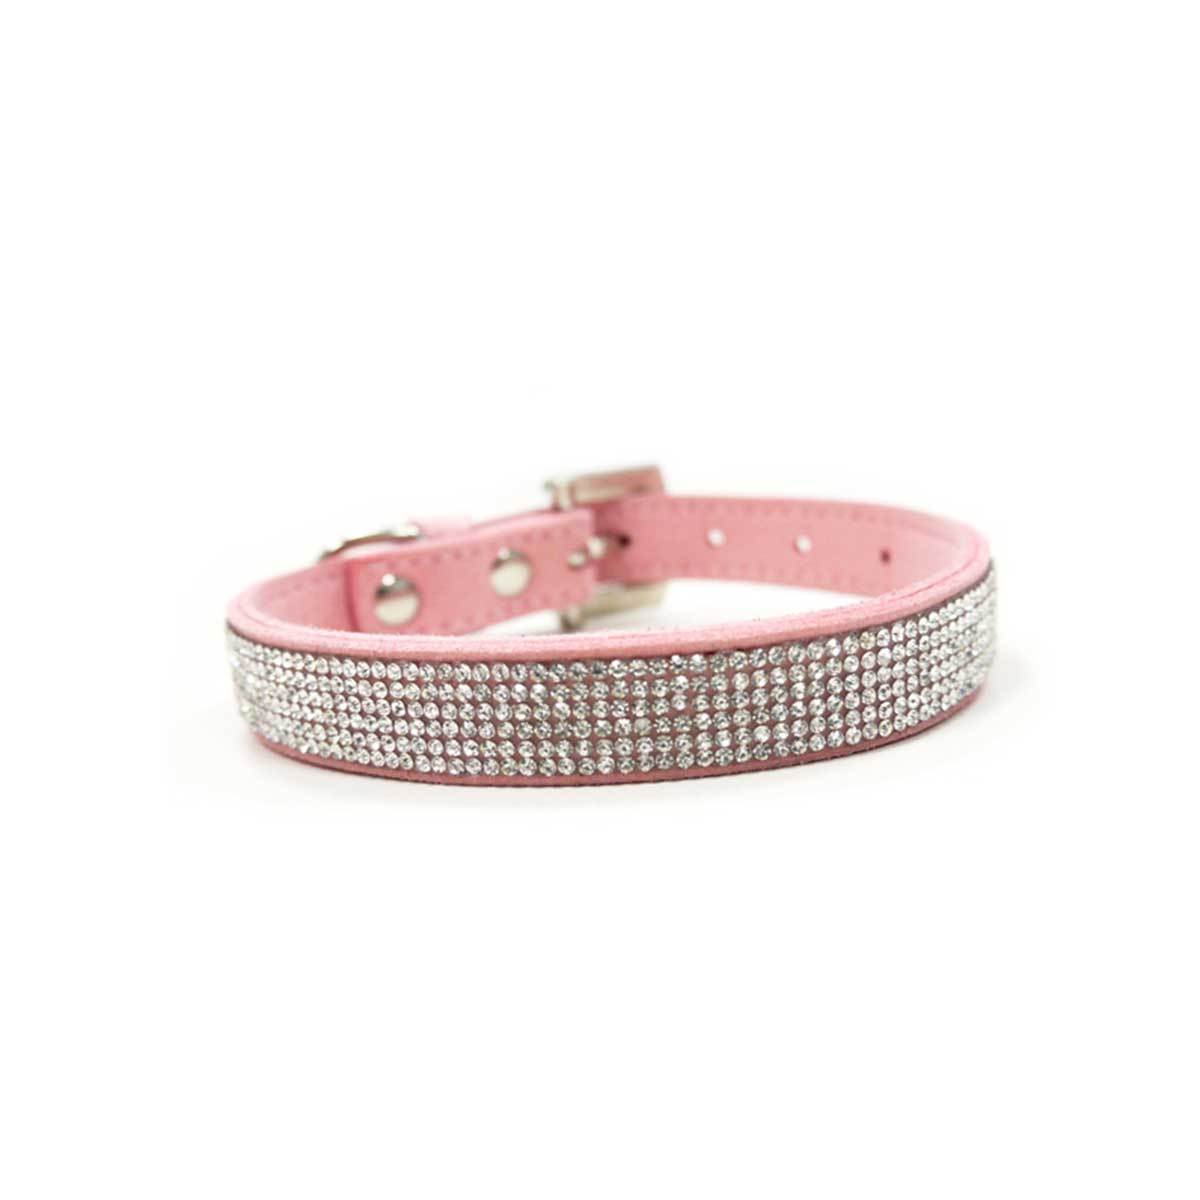 VIP Bling Collar in Pink with Rhinestone Studded Buckle | Pawlicious & Company